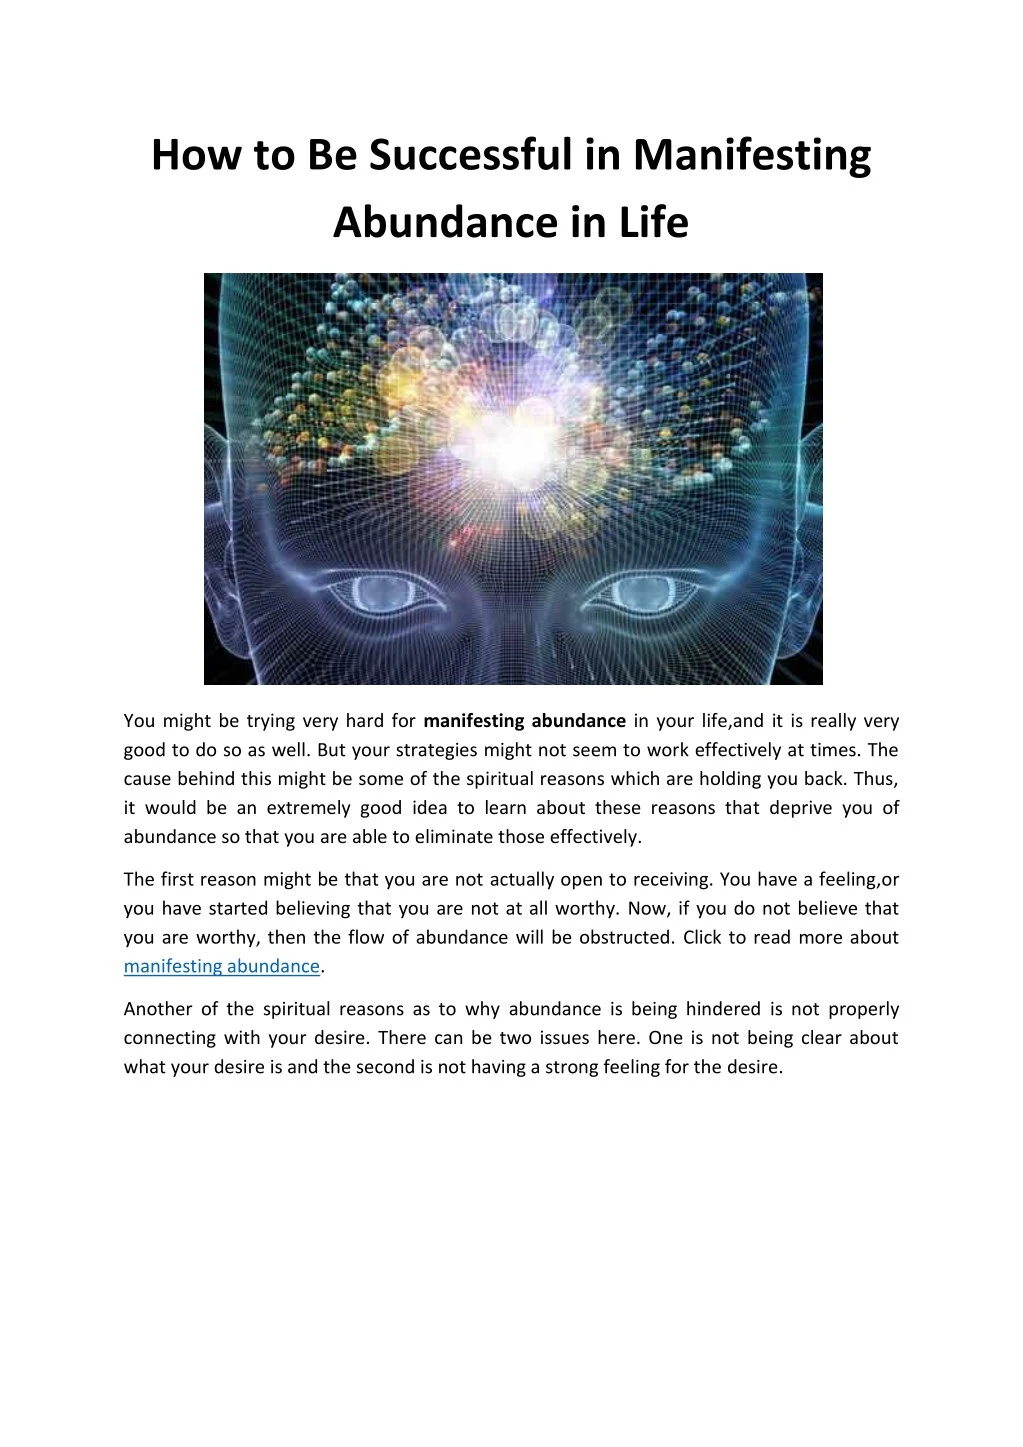 how to be successful in manifesting abundance